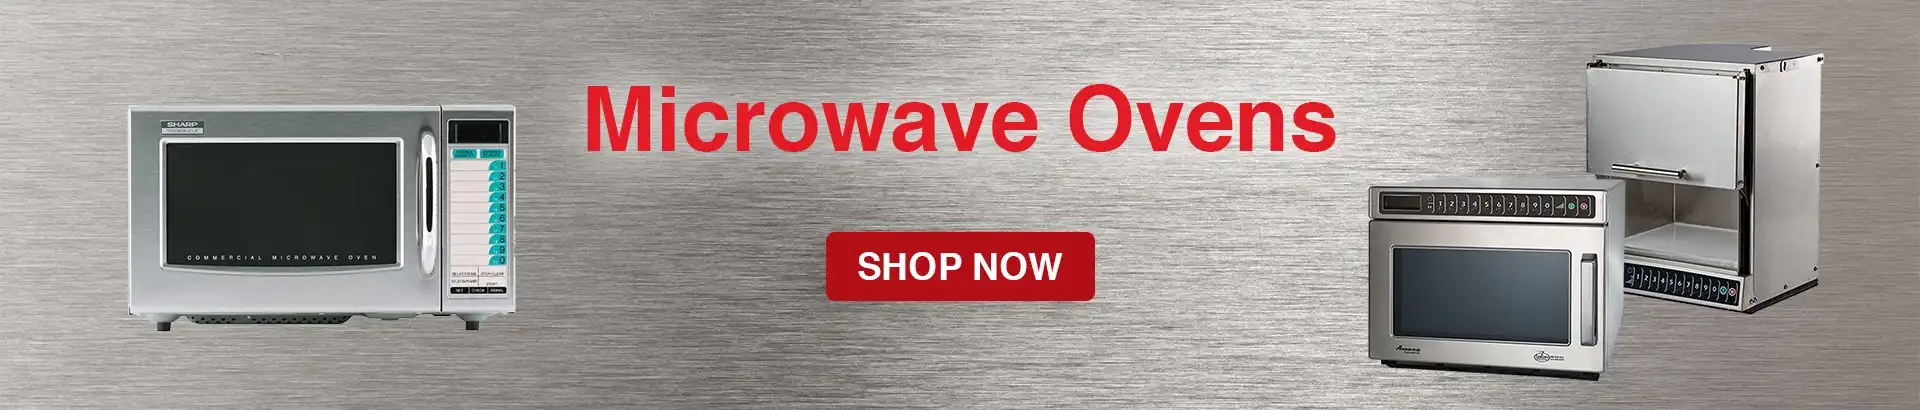 Banner image displaying text for Microwave Ovens available to shop now